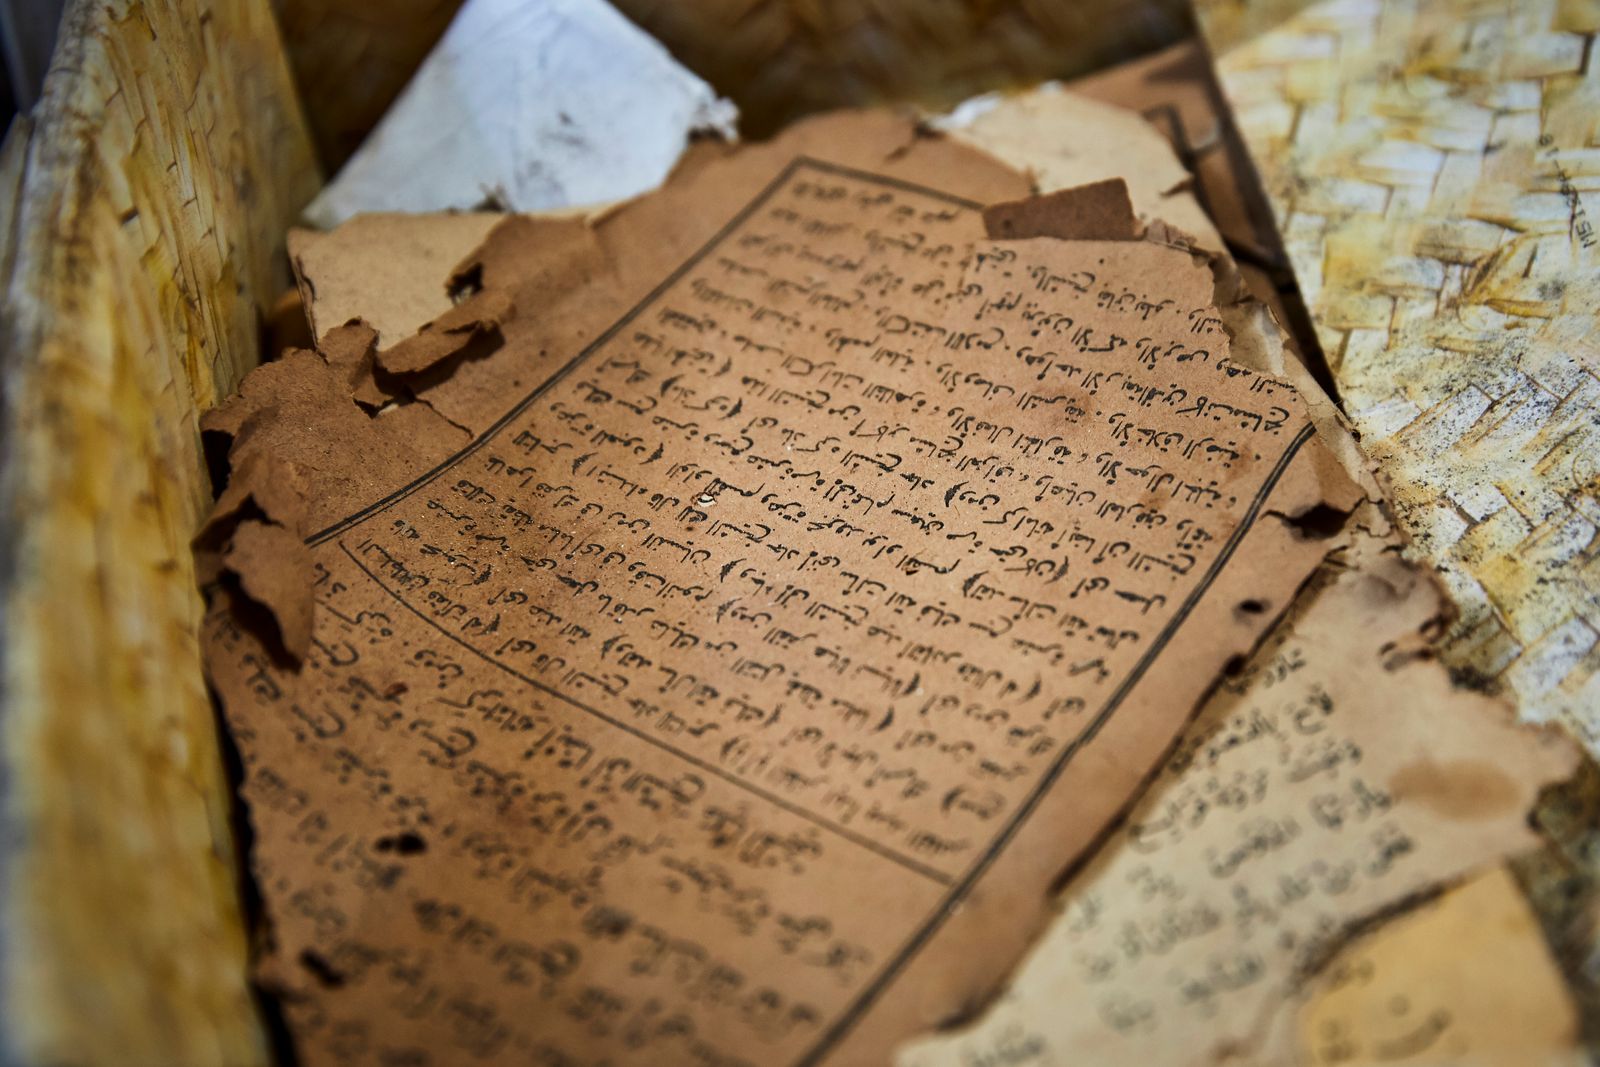 © Nicky Quamina-Woo - Worn pages of the Quran used in bestowing blessings by traditional healer, Mrisho ,in Jambiani village